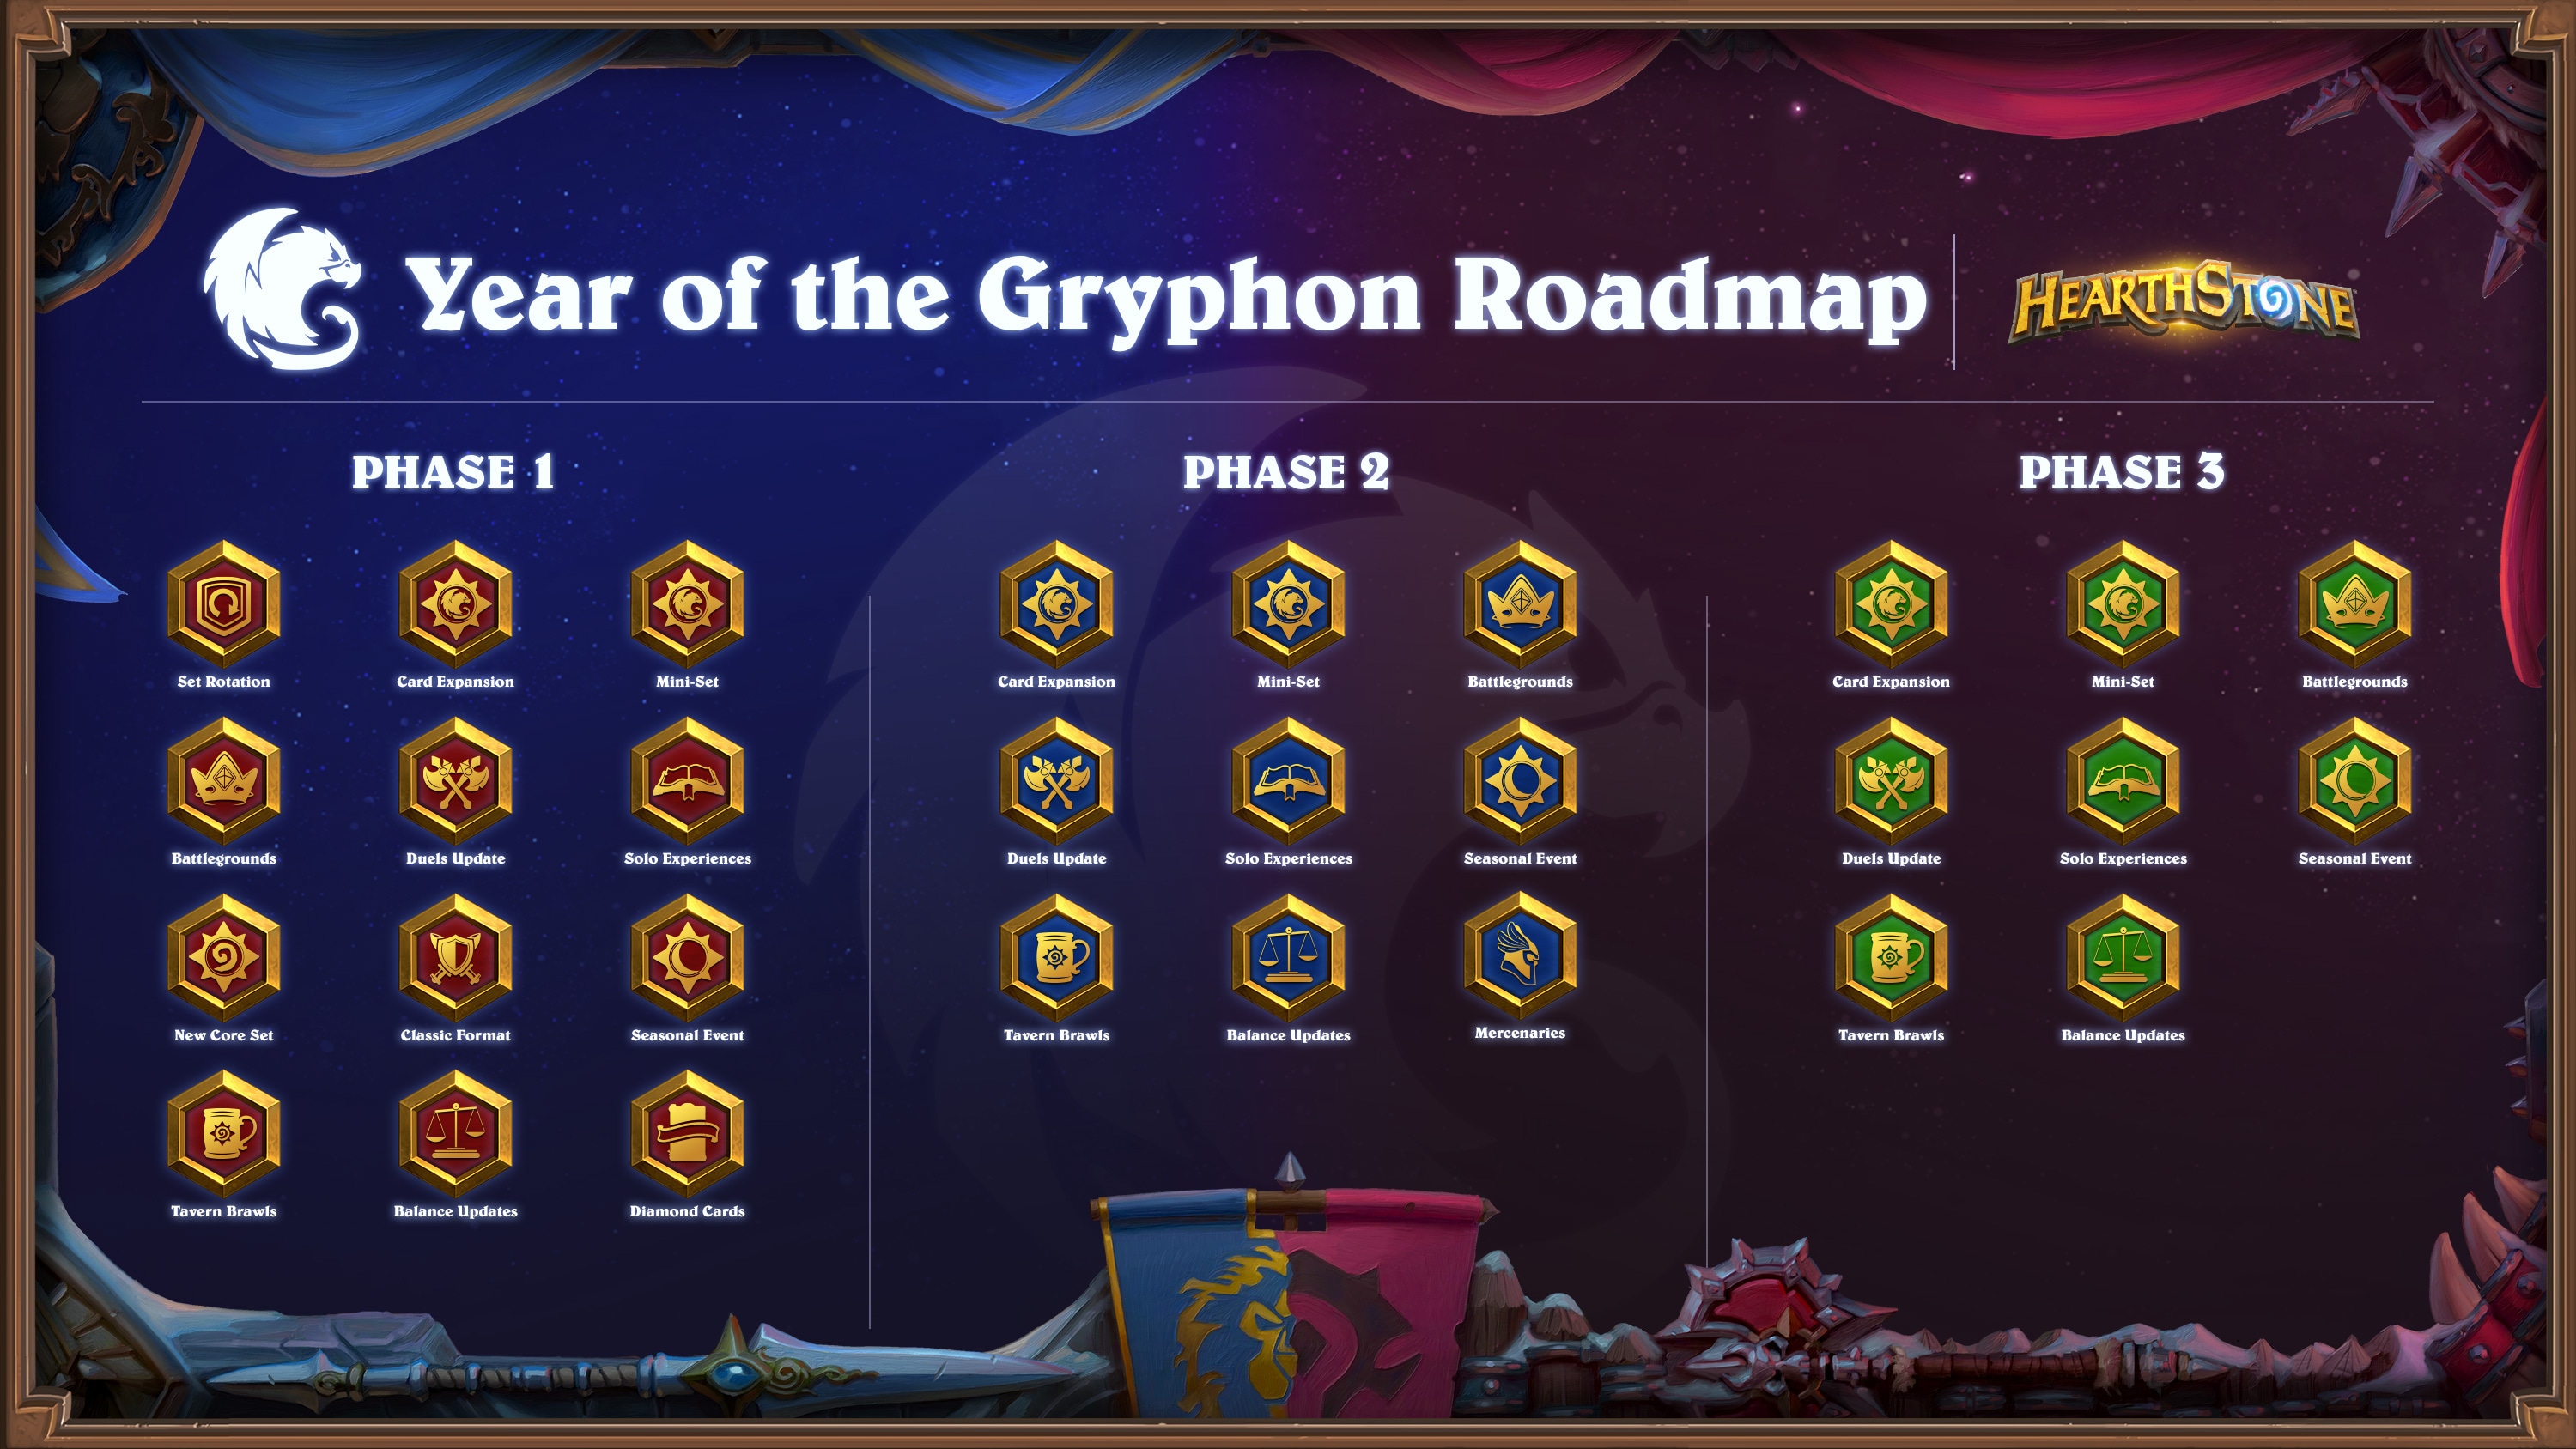 Year of the Gryphon Roadmap! Phase 3 is the same as it was before.